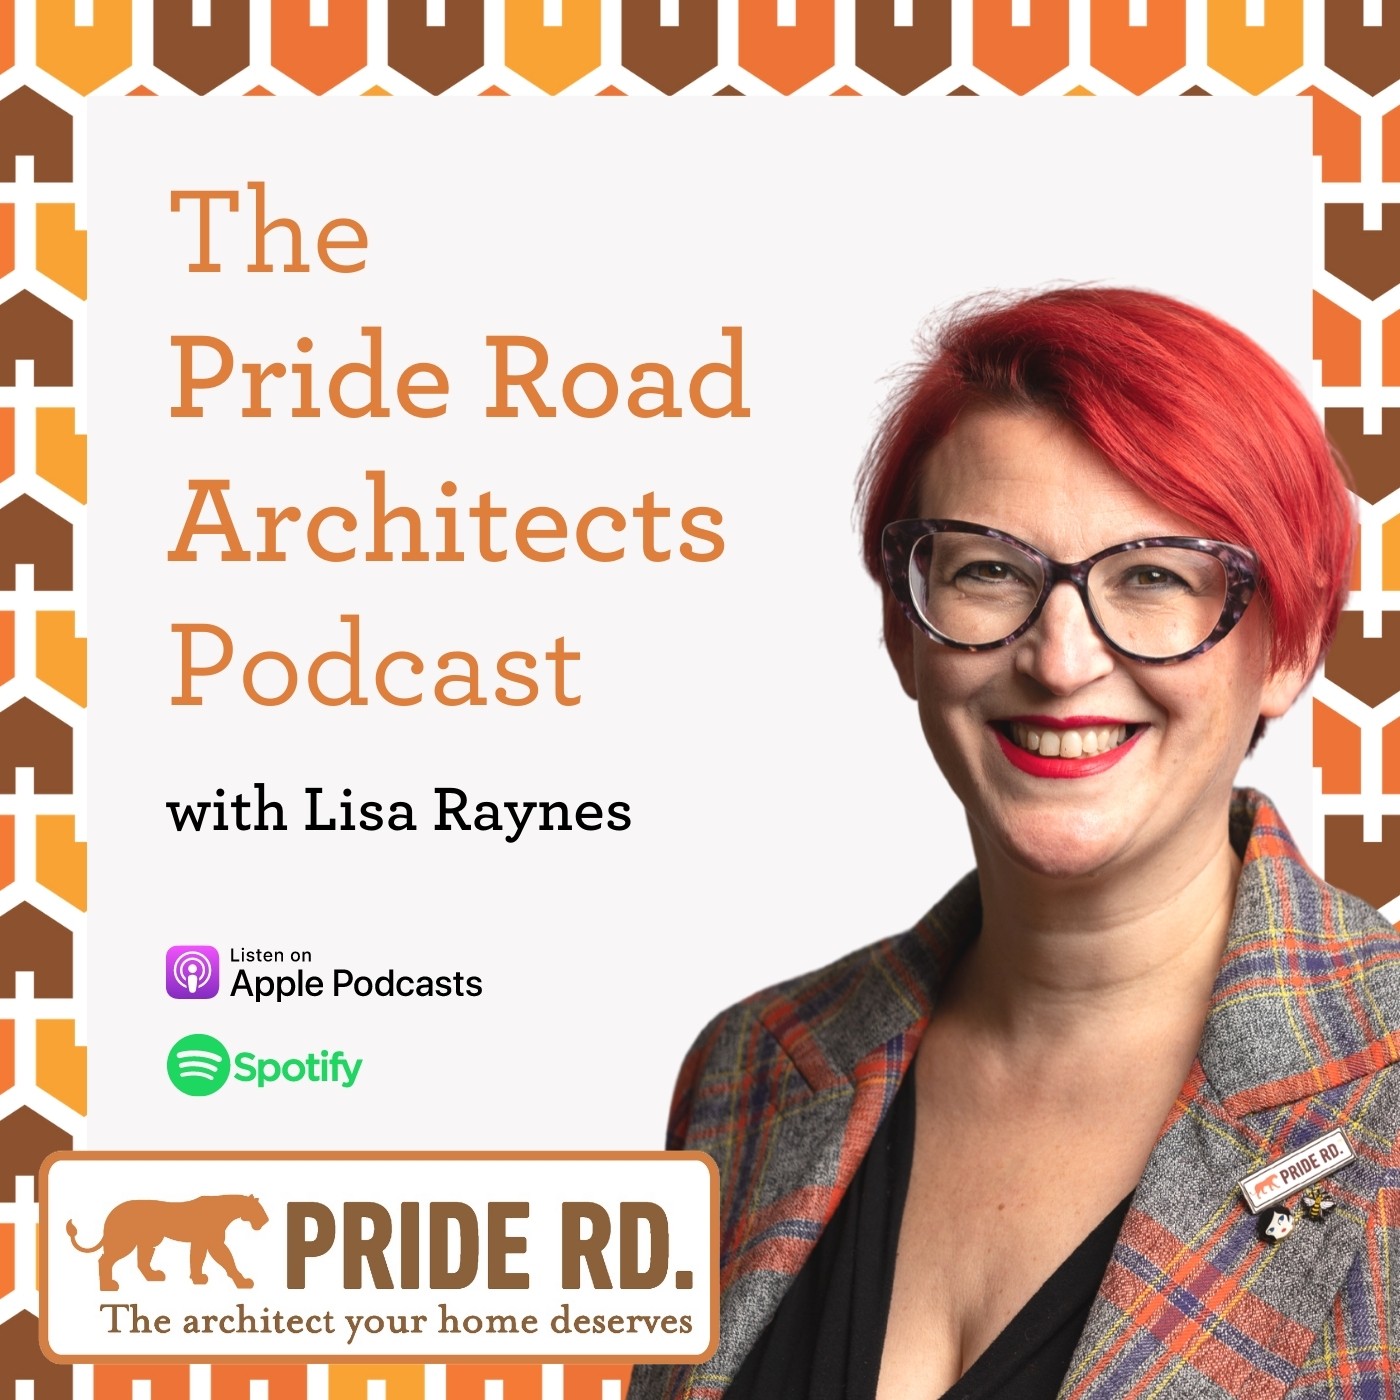 The Pride Road Architects Podcast